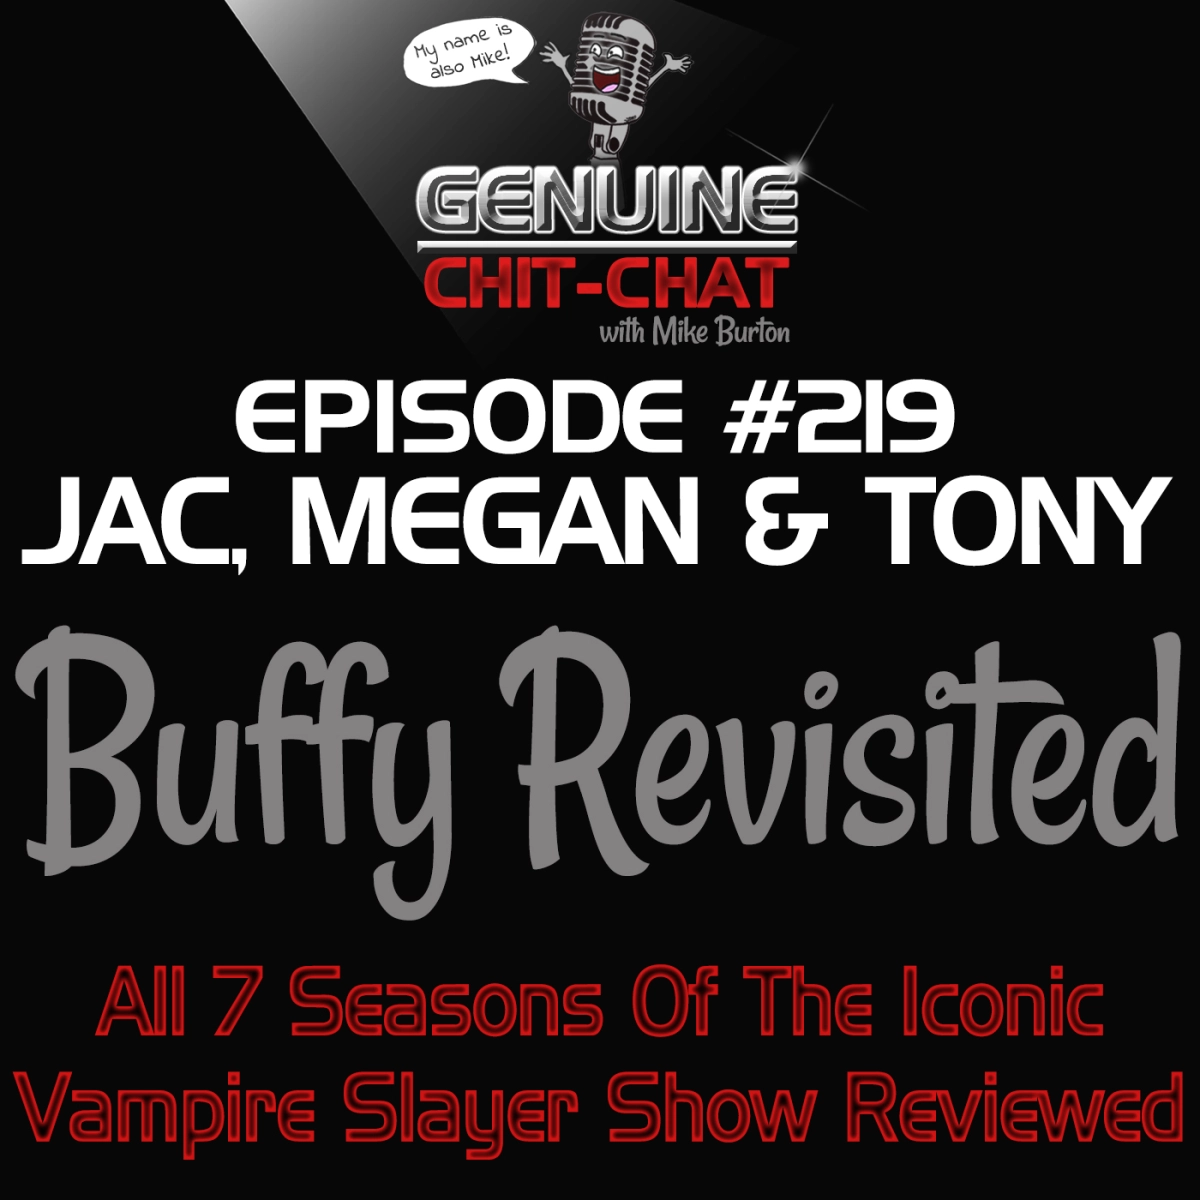 #219 – Buffy Revisited: All 7 Seasons Of The Iconic Vampire Slayer Show Reviewed, With JAC, Tony & Megan